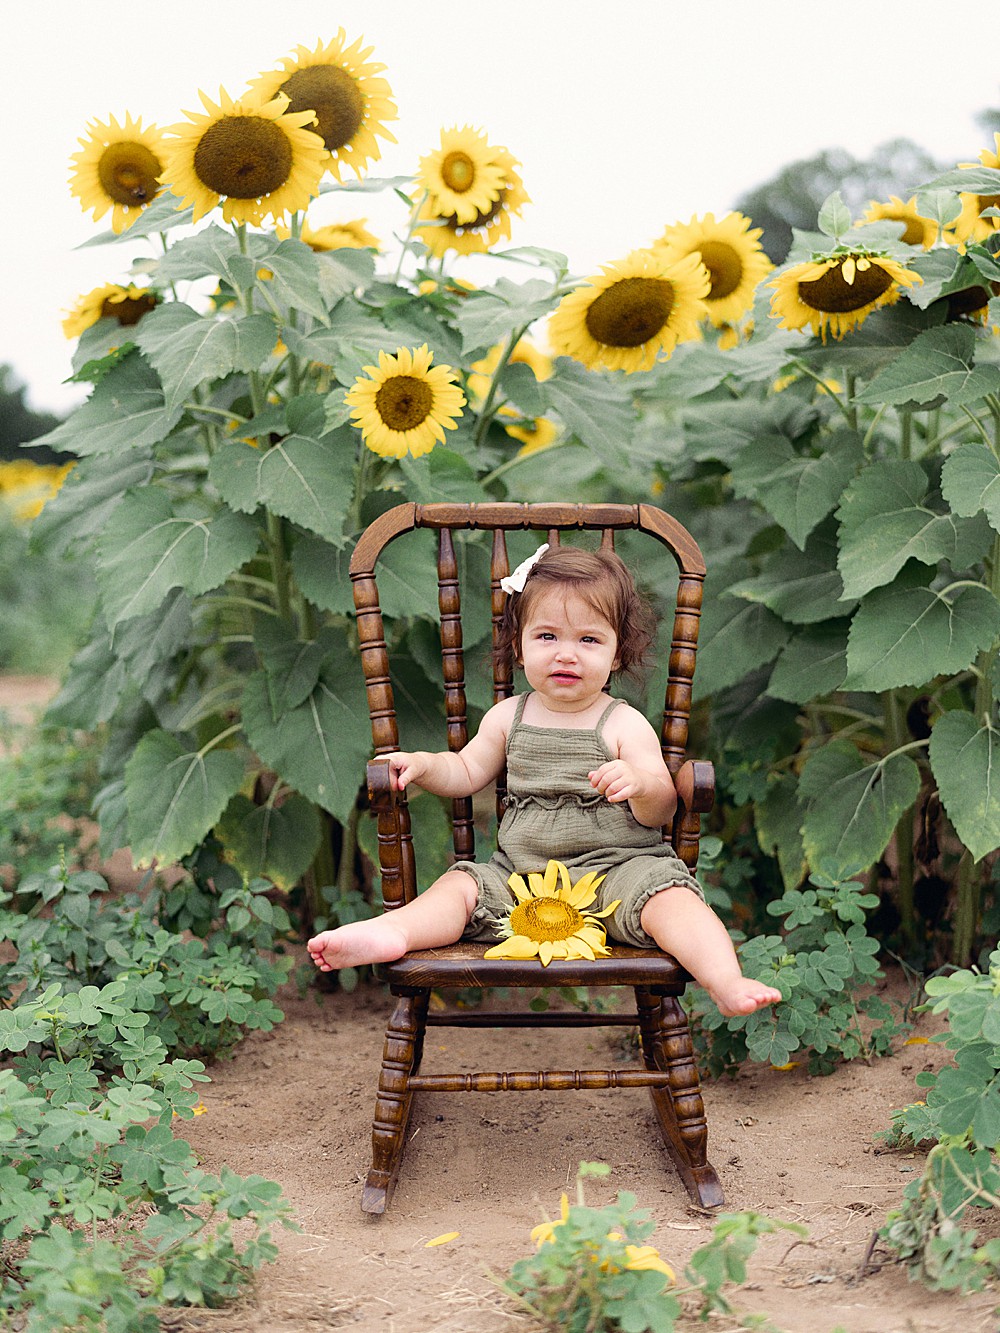 One year old baby girl on a wooden chair among sunflowers